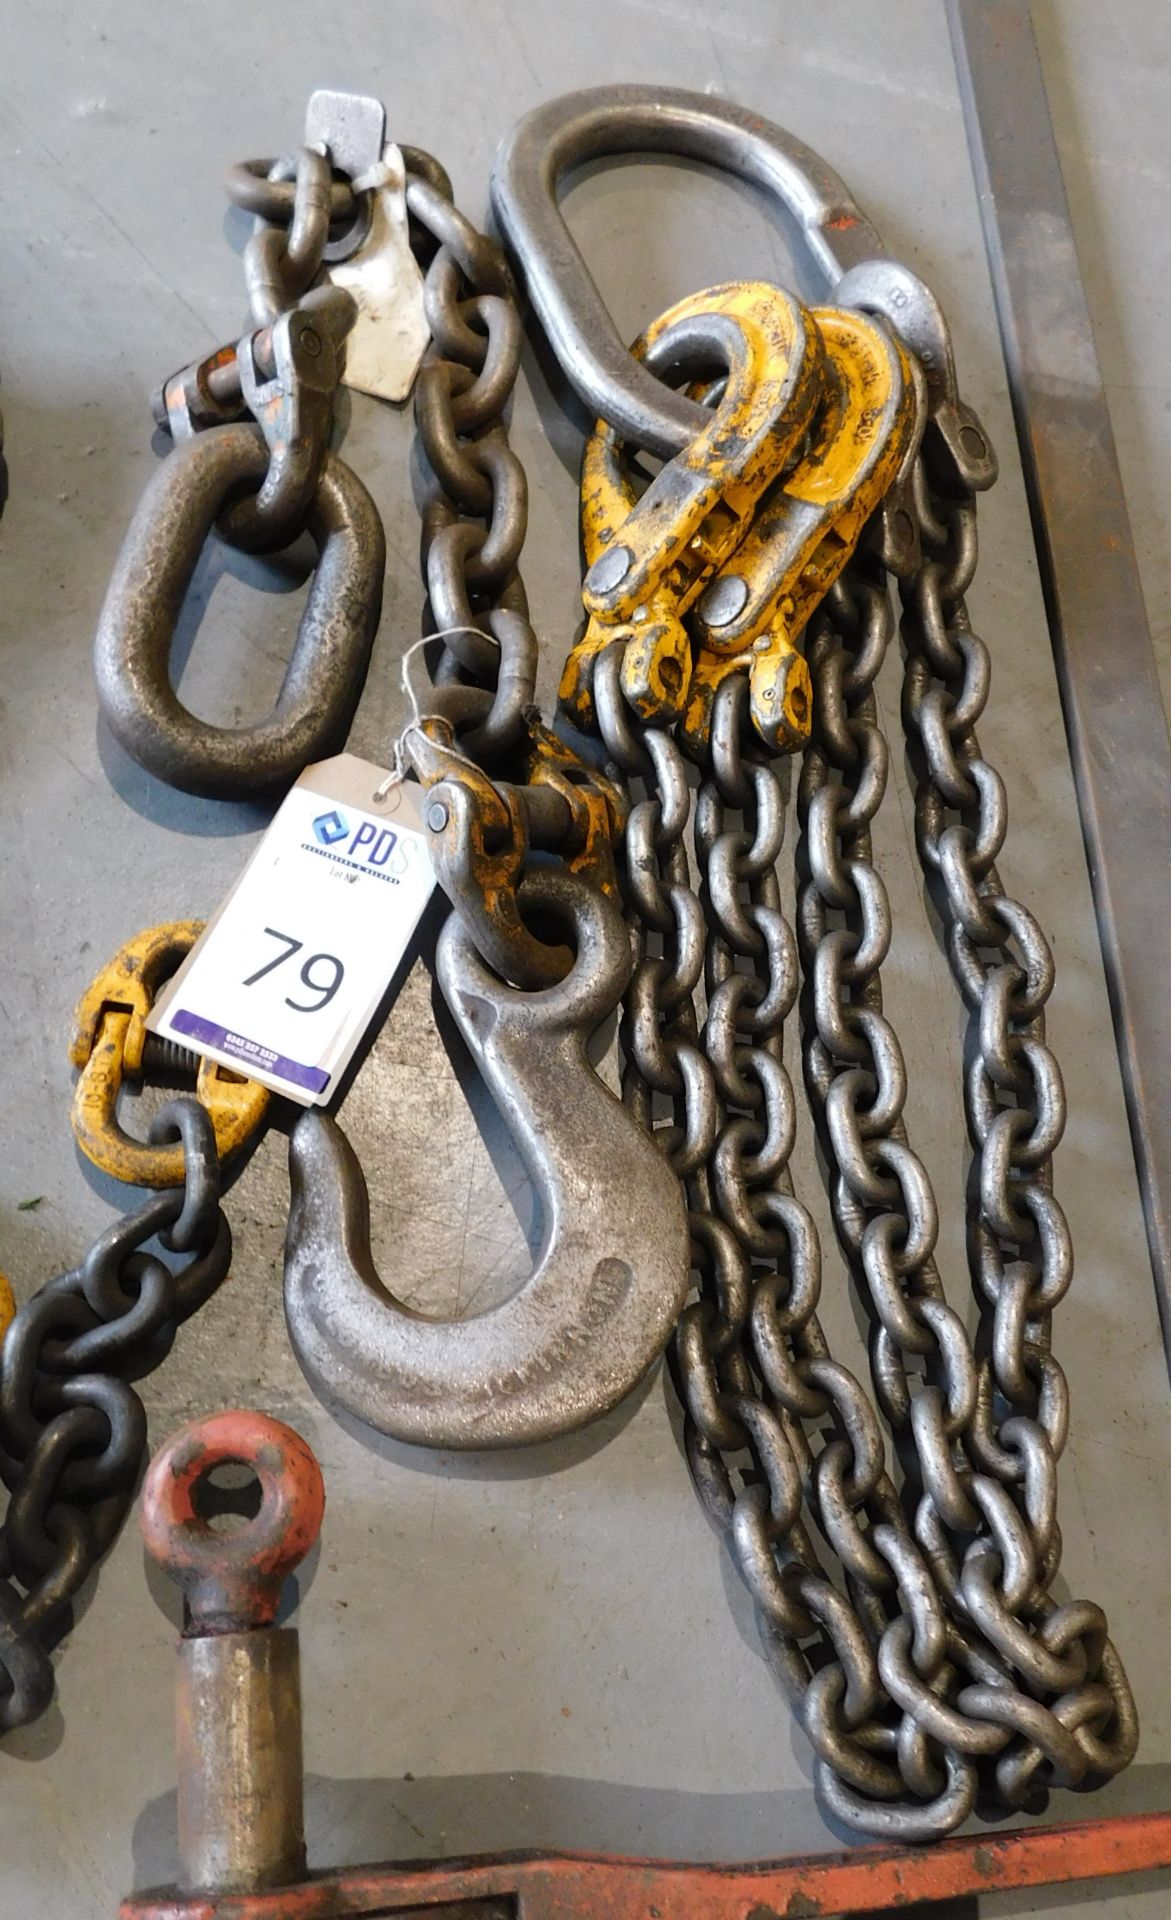 2 Sets of Brothers Chains, 2 Chain Hoists & 2-Leg Lifting Chain, Ratchet Tensioner & Sash Cramp ( - Image 5 of 6